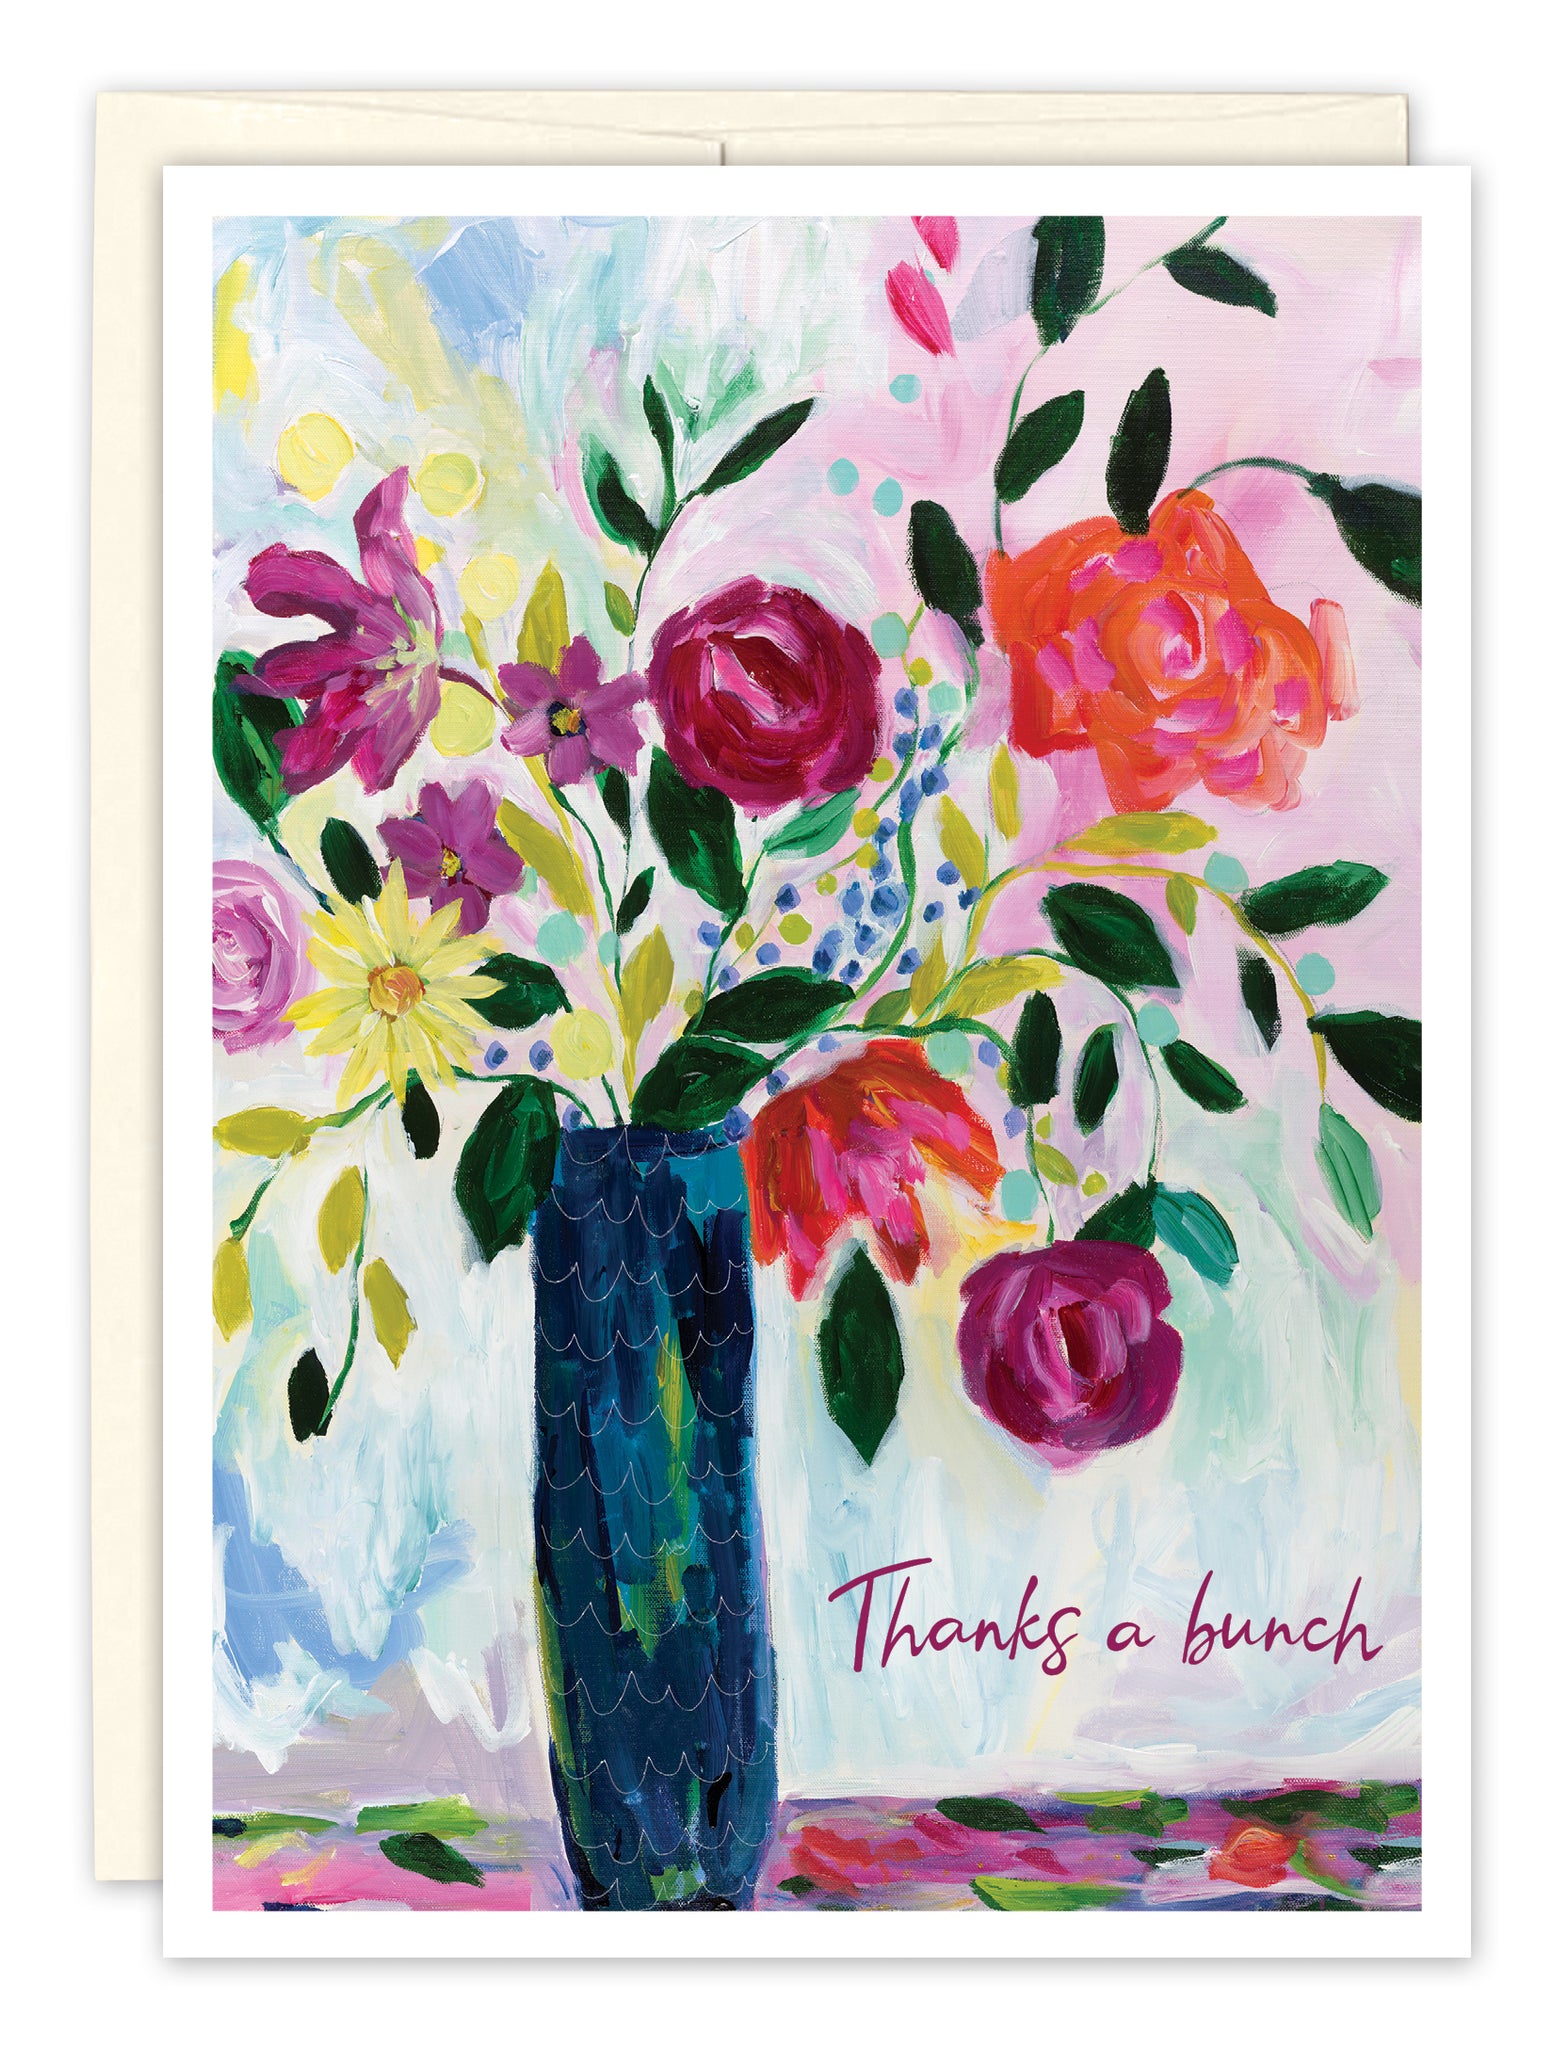 Thank You Card: THANKS A BUNCH